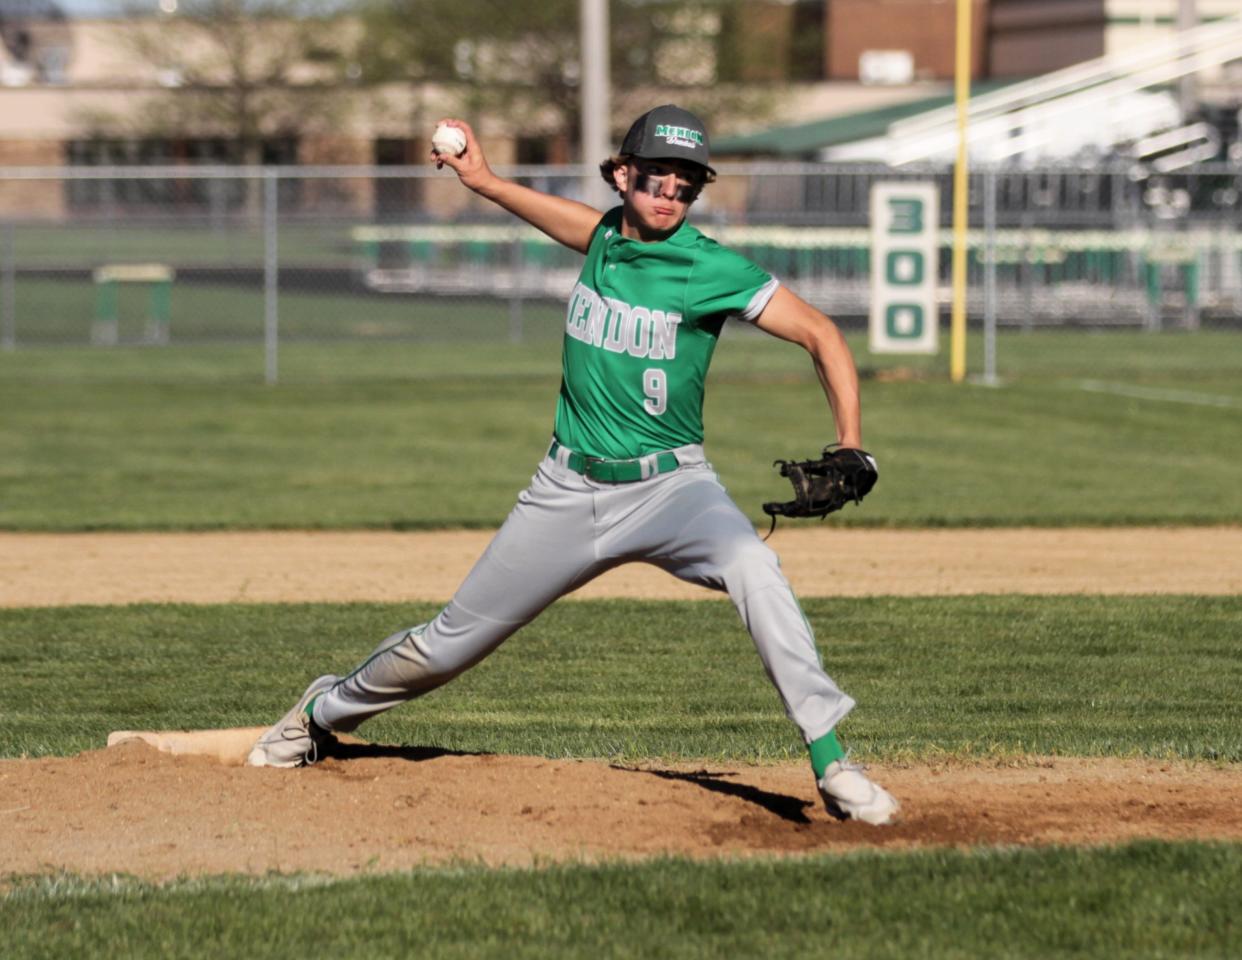 Brayden Crites struck out seven batters to pick up a win for Mendon.